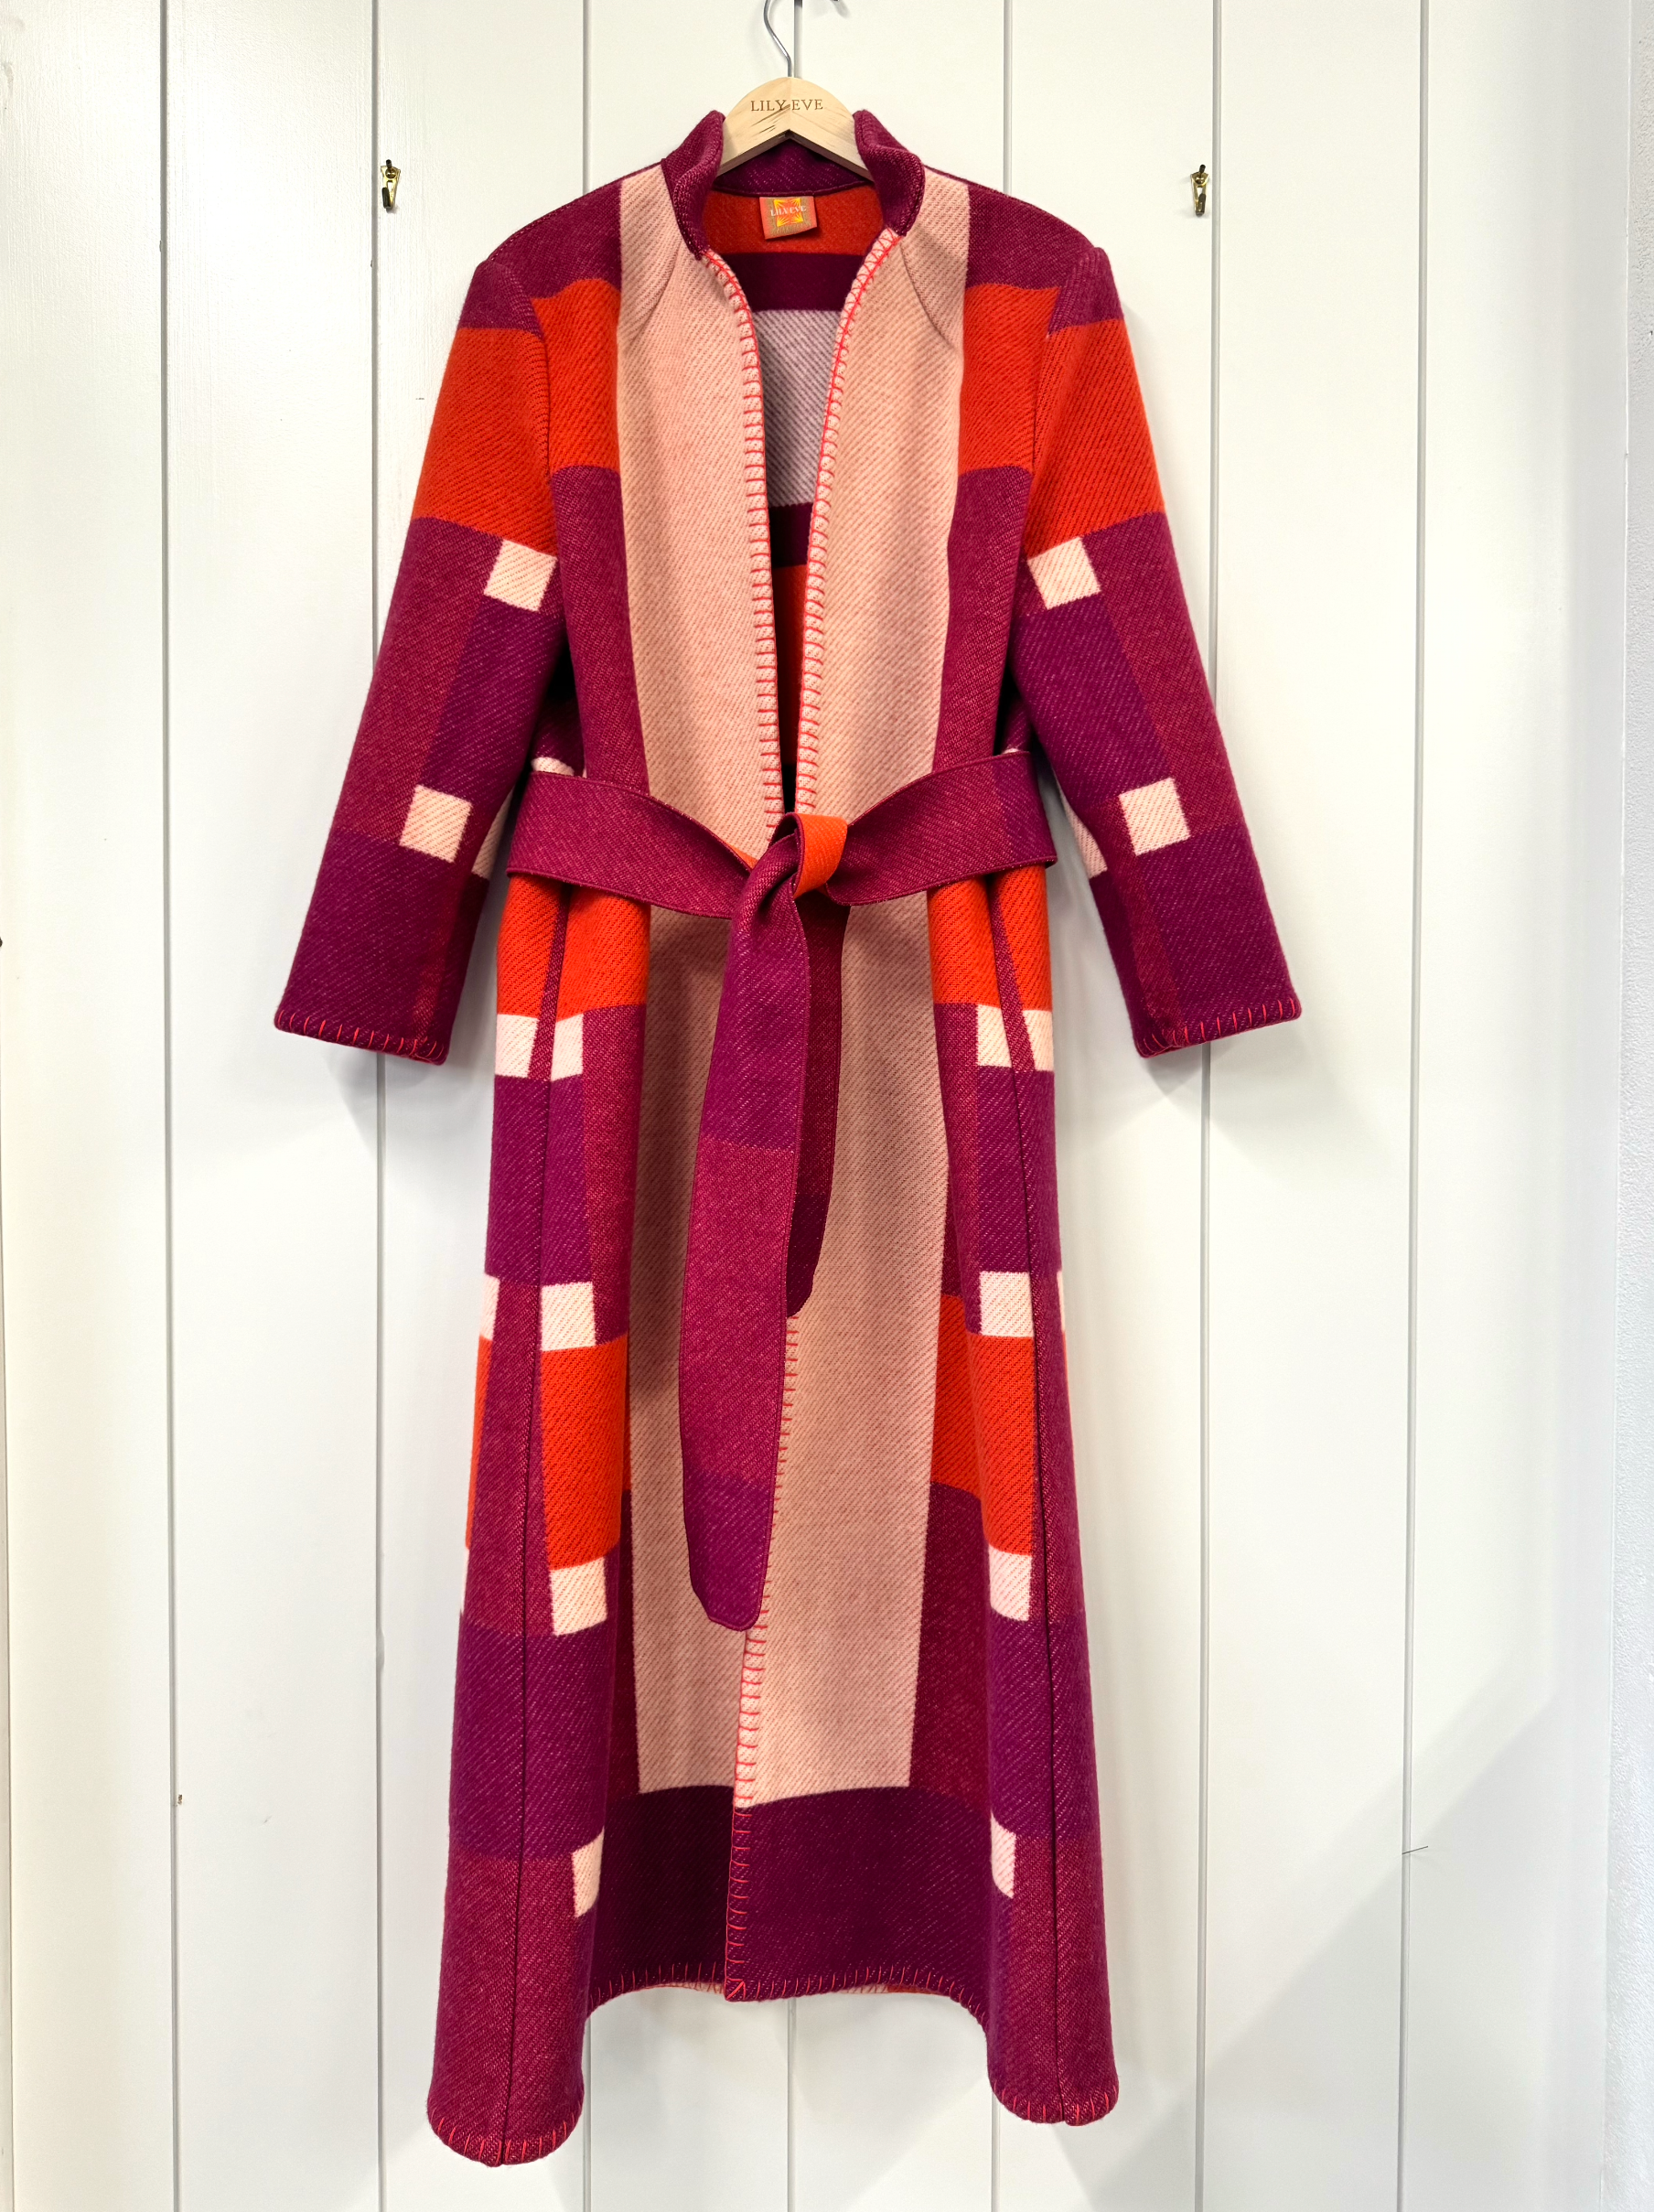 The Pink Patchwork Coat